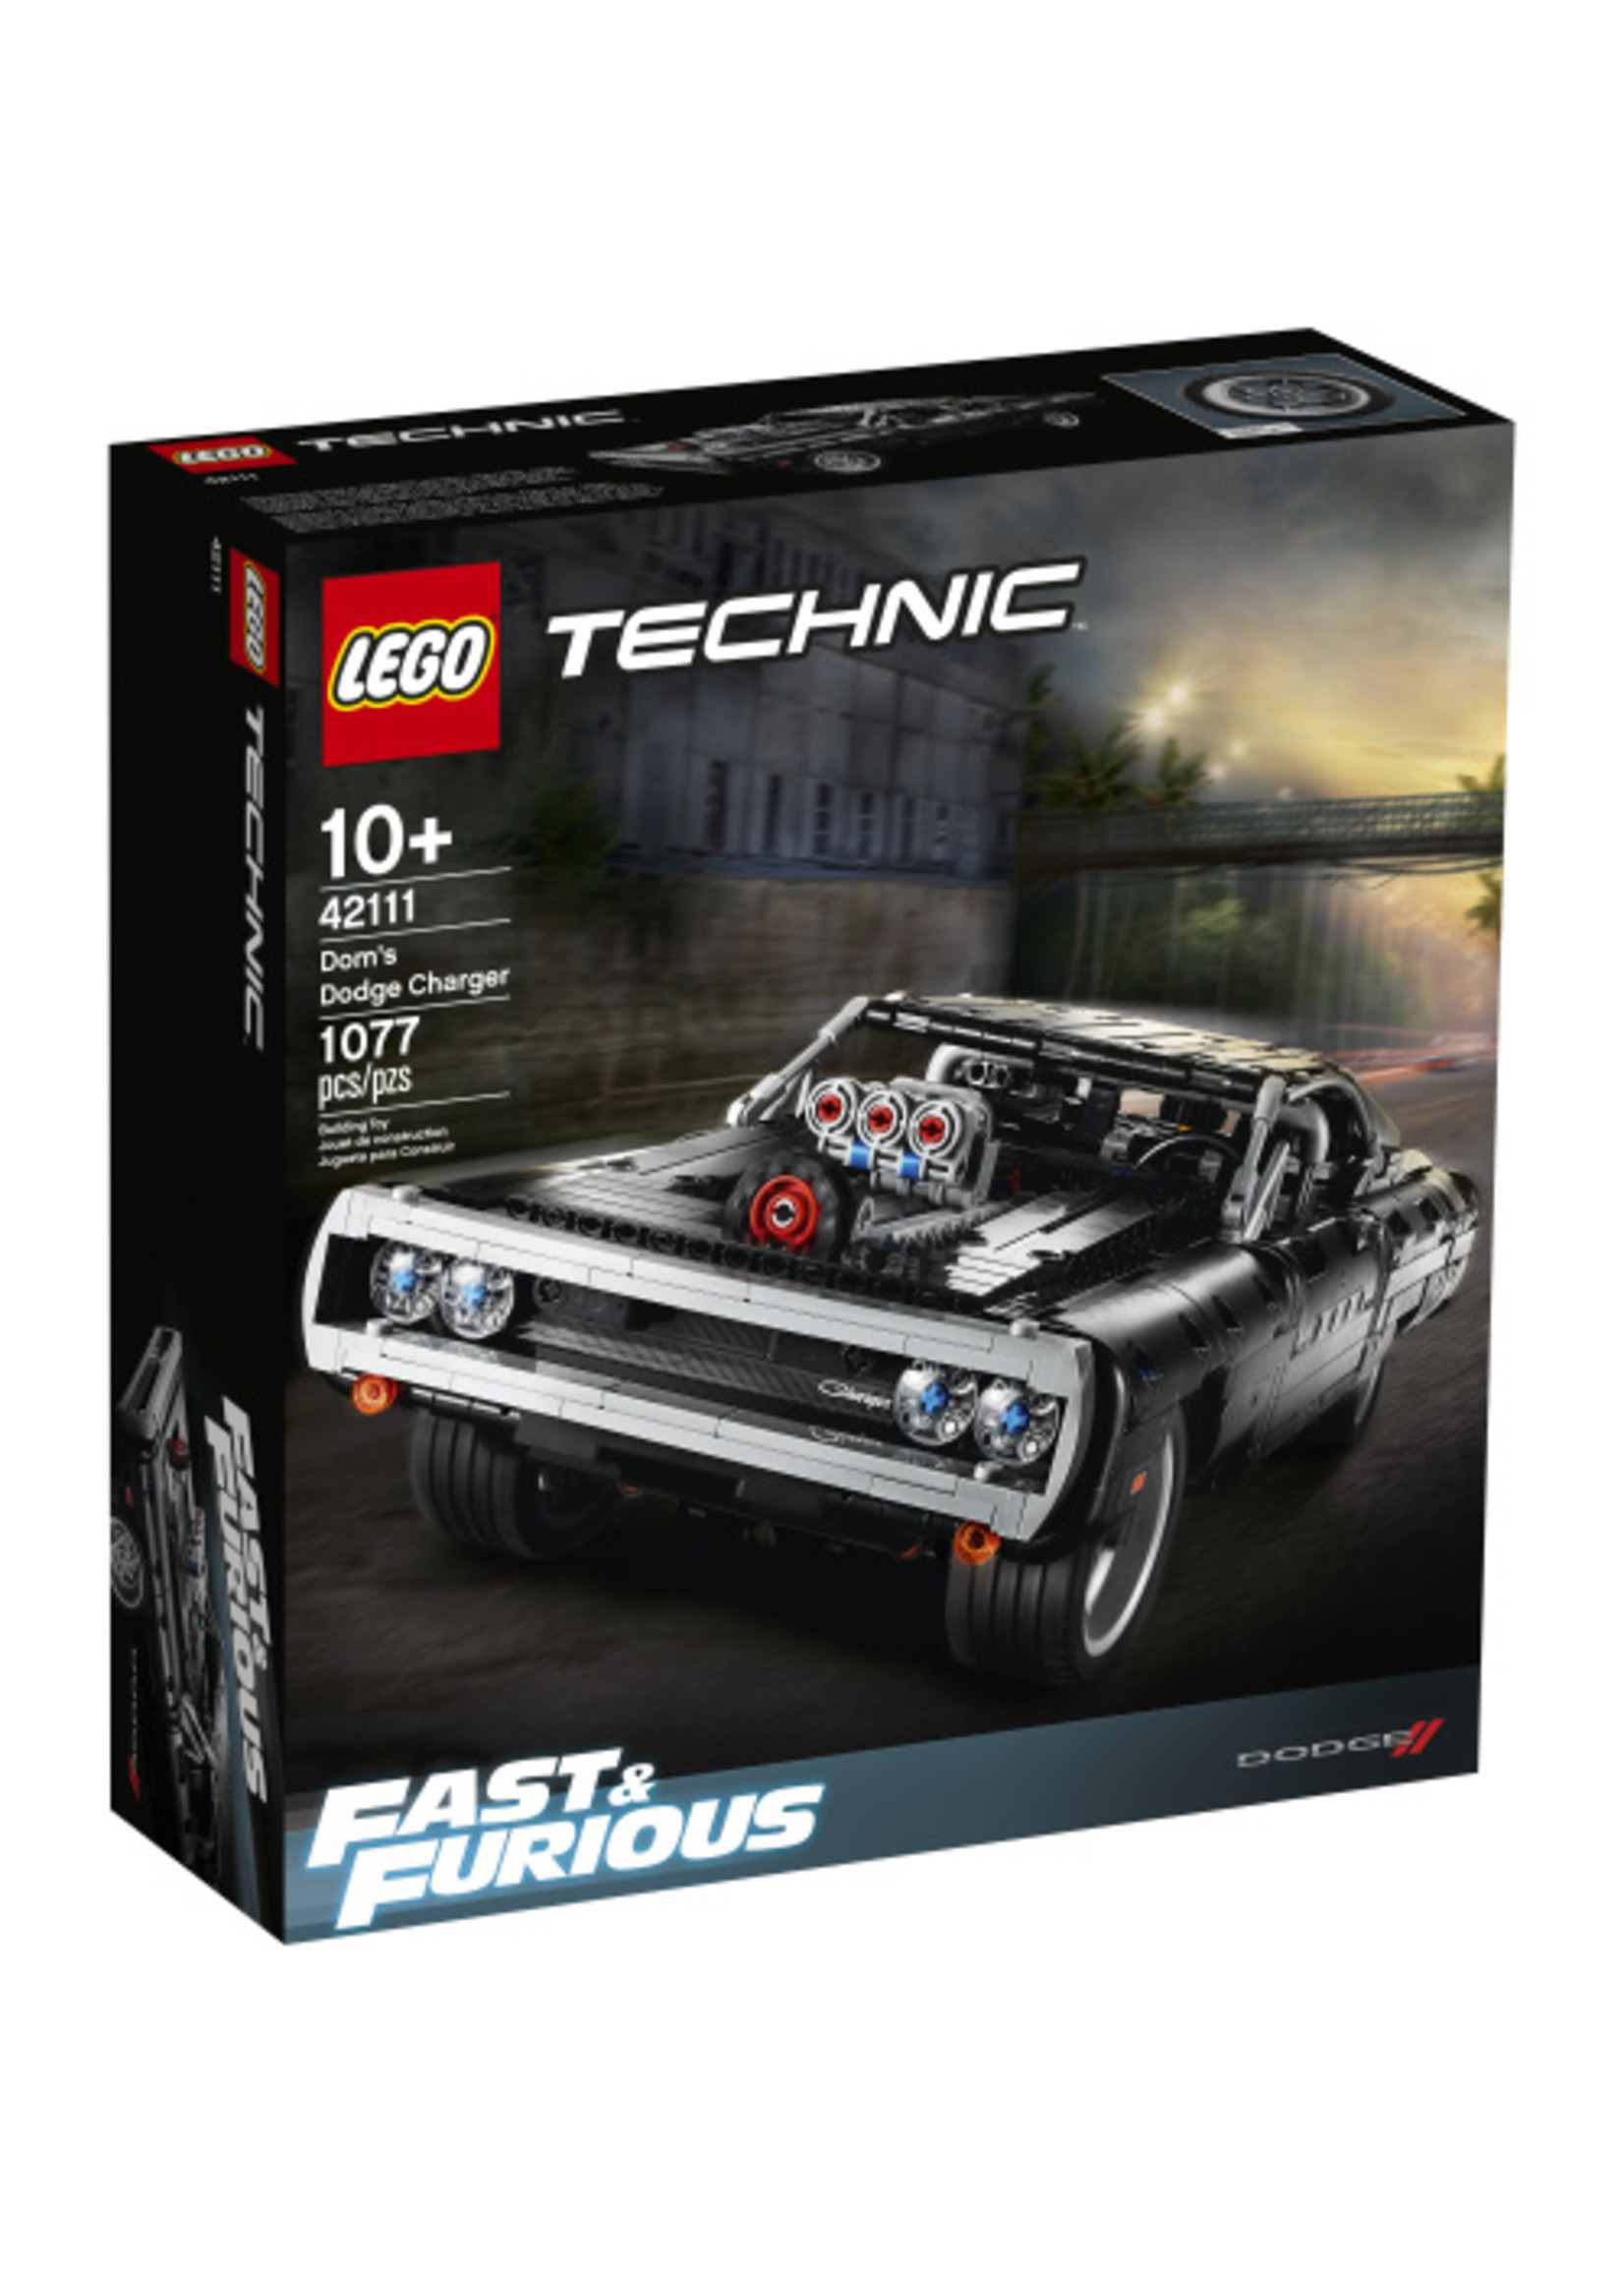 LEGO 42111 - Dom's Dodge Charger